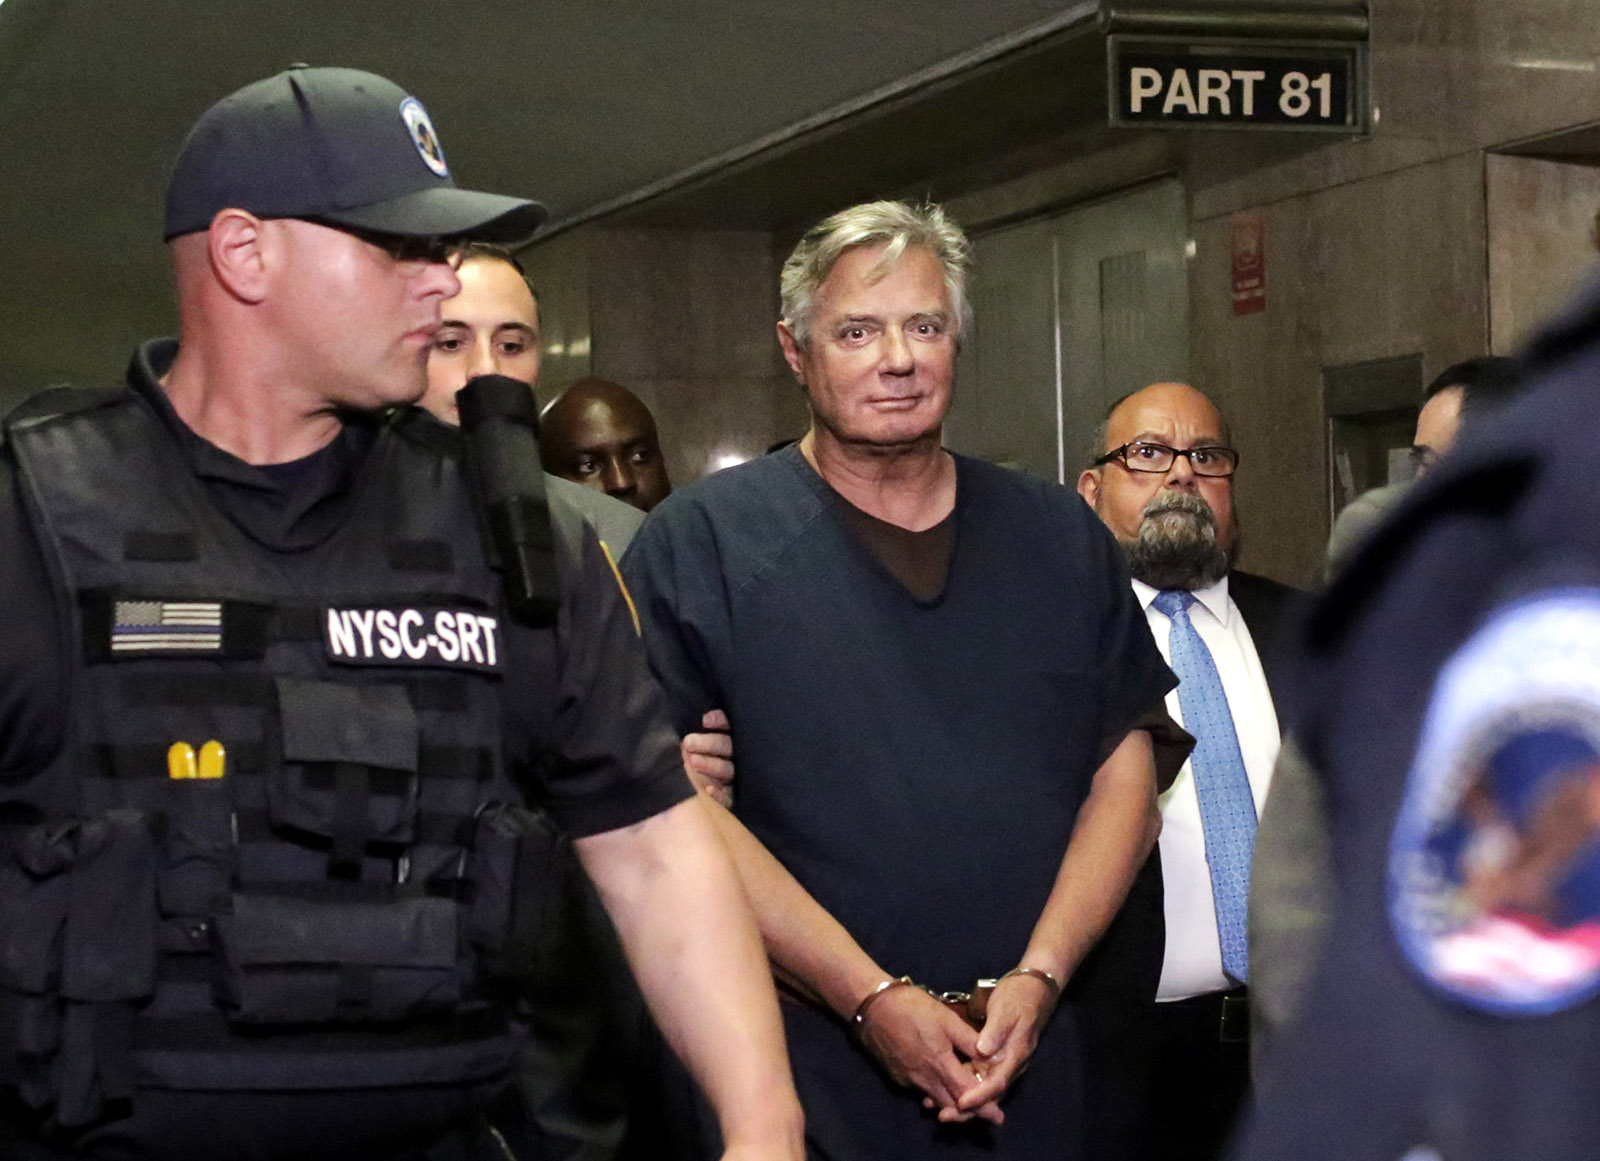 Former Trump campaign chairman Paul Manafort leaving his arraignment on multiple felony charges in Manhattan Criminal Court, New York, June 27, 2019